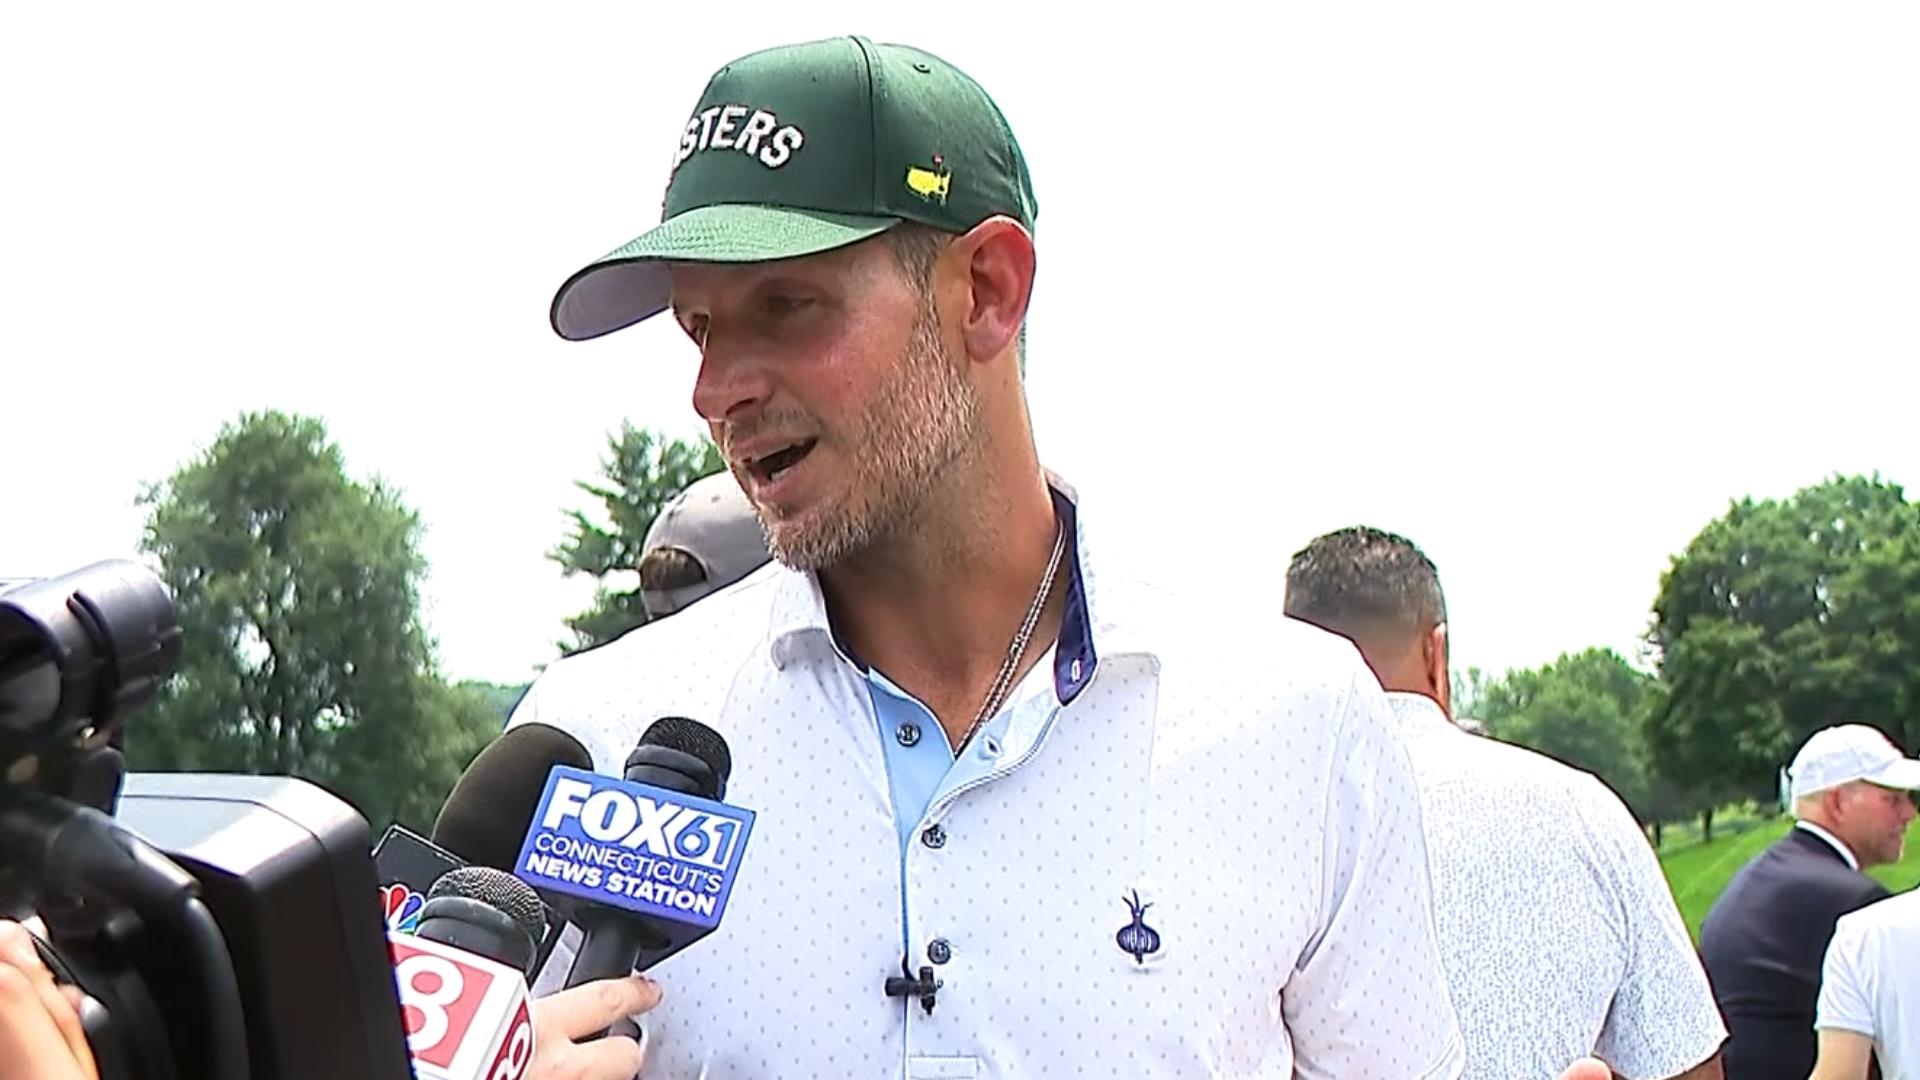 Former NFL, UConn quarterback Dan Orlovsky participated in the Travelers Celebrity Pro-Am Day on Wednesday at TPC River Highlands in Cromwell.